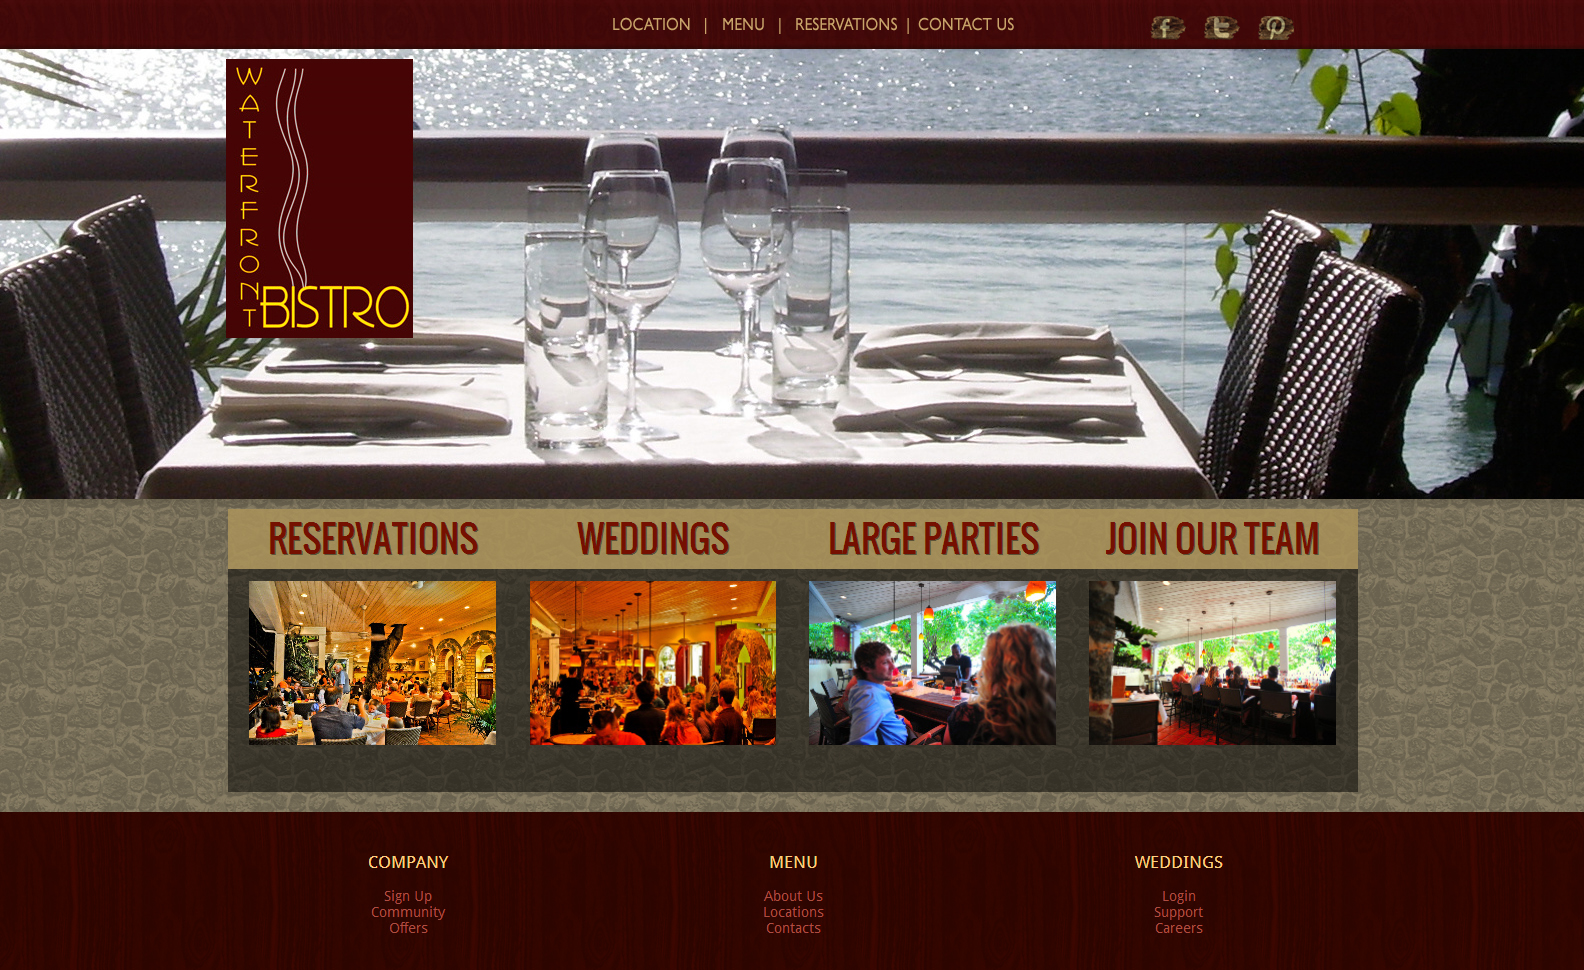 The Waterfront Bistro